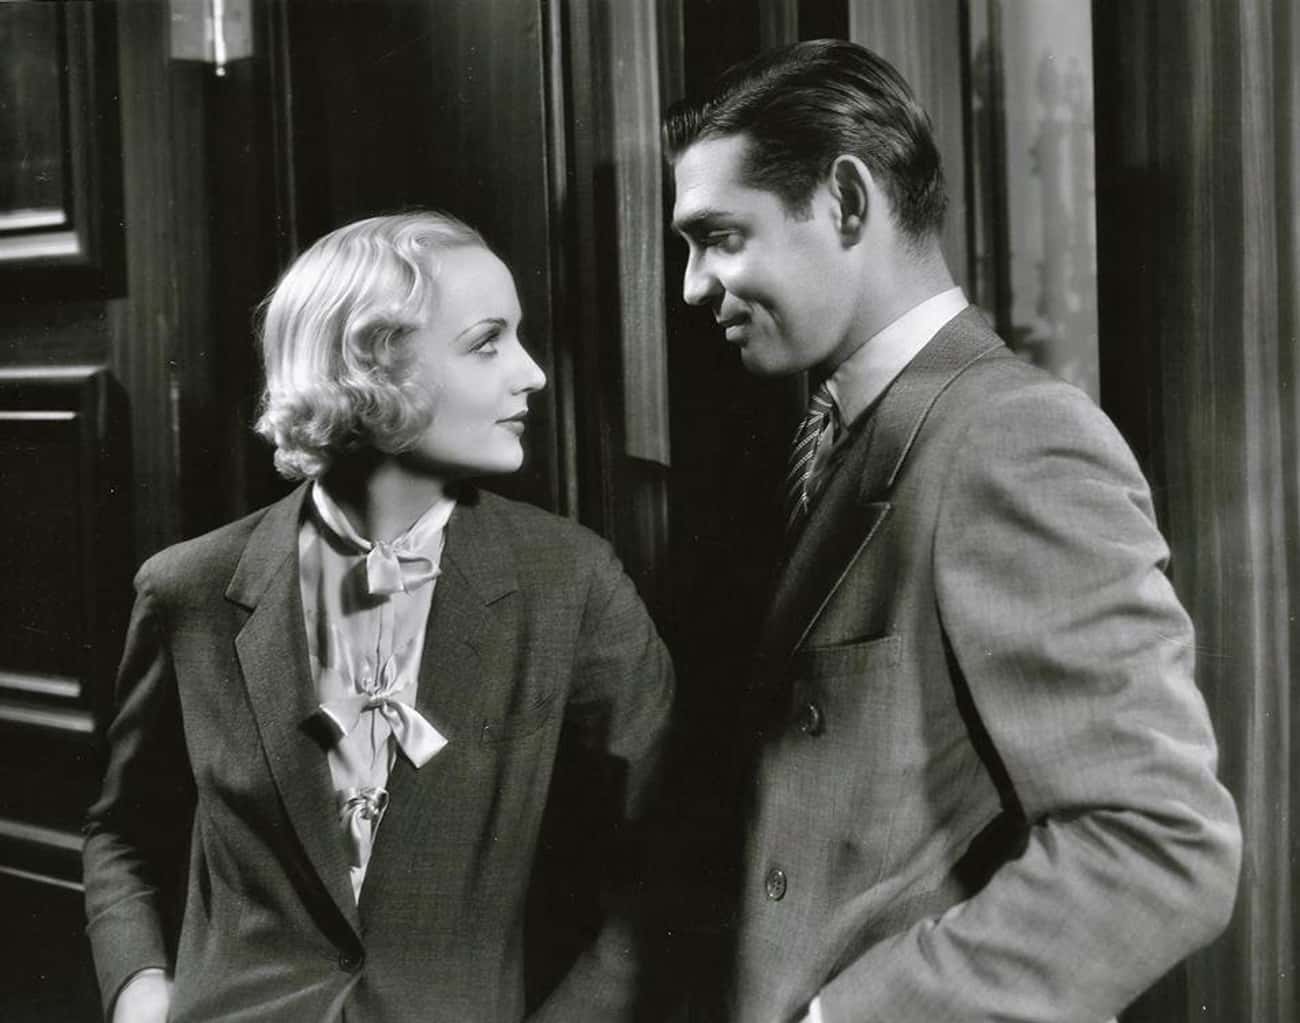 His Third Wife Carole Lombard Was The Love Of His Life